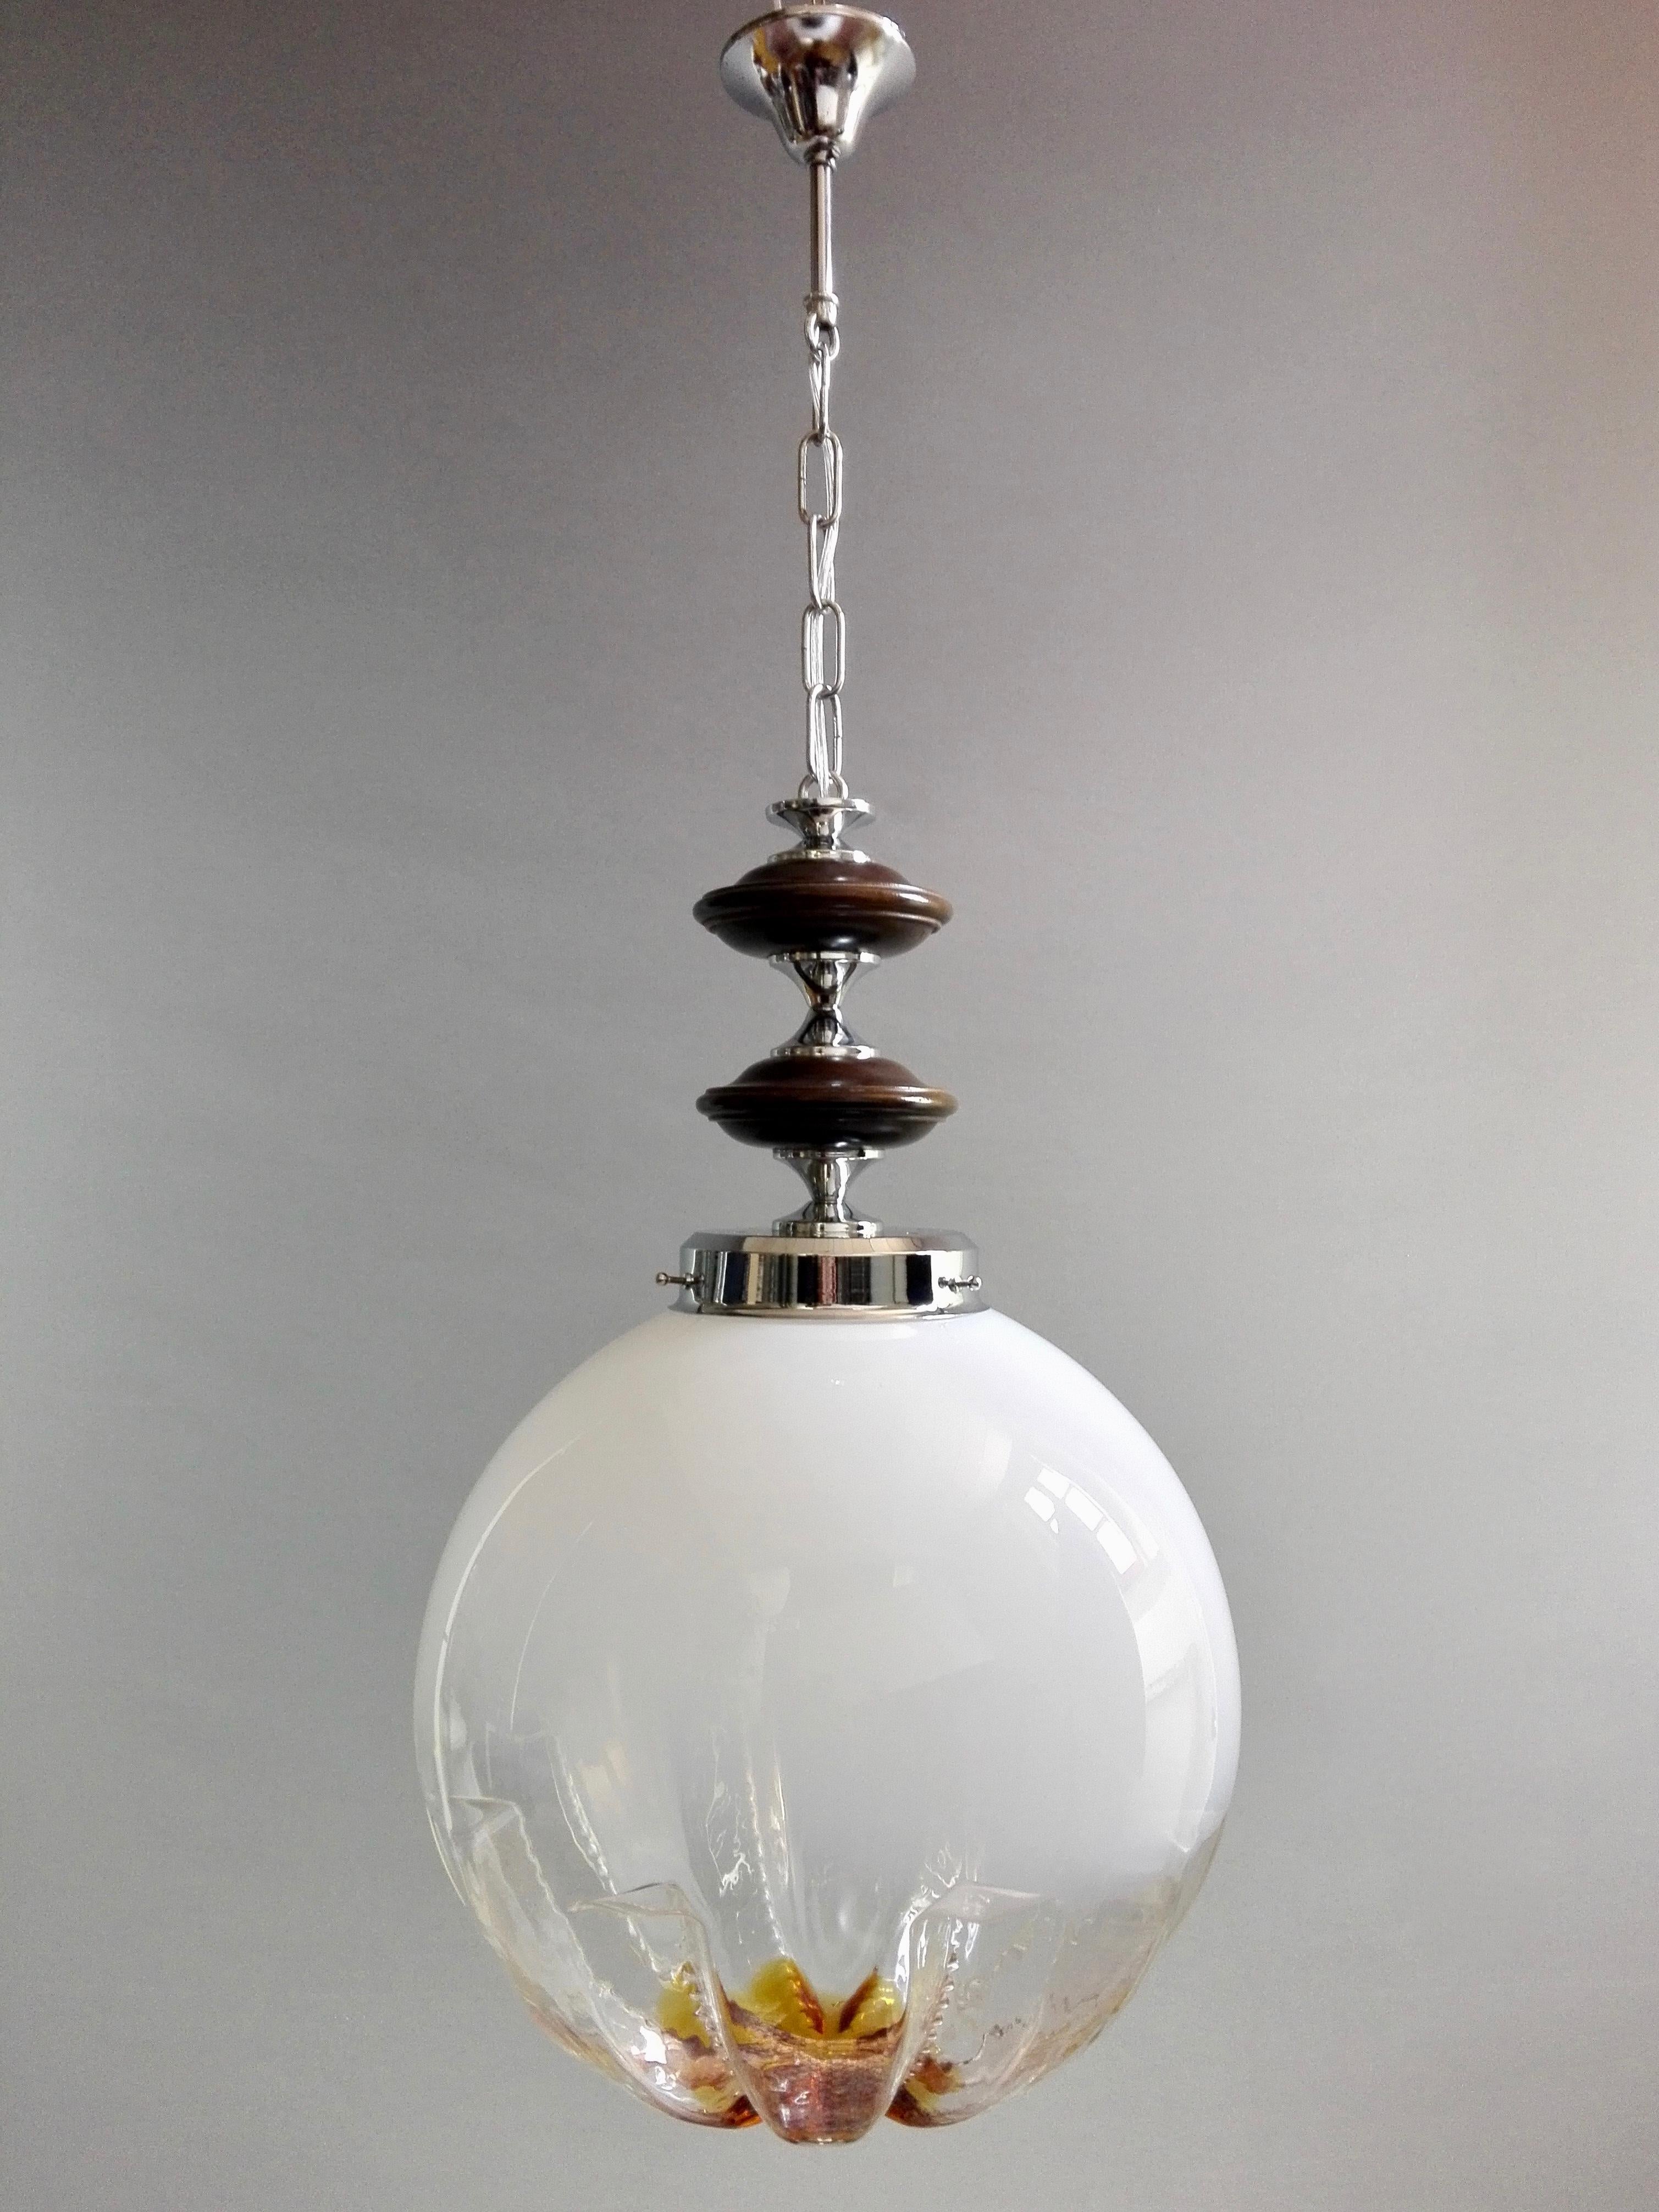 A beautiful large Italian 1970s Space Age one-light Mazzega attributable pendant lamp.
The light has a chrome structure with wooden elements and a really nice clear/milky white Lattimo and amber/orange Murano art glass lampshade. 
The so called